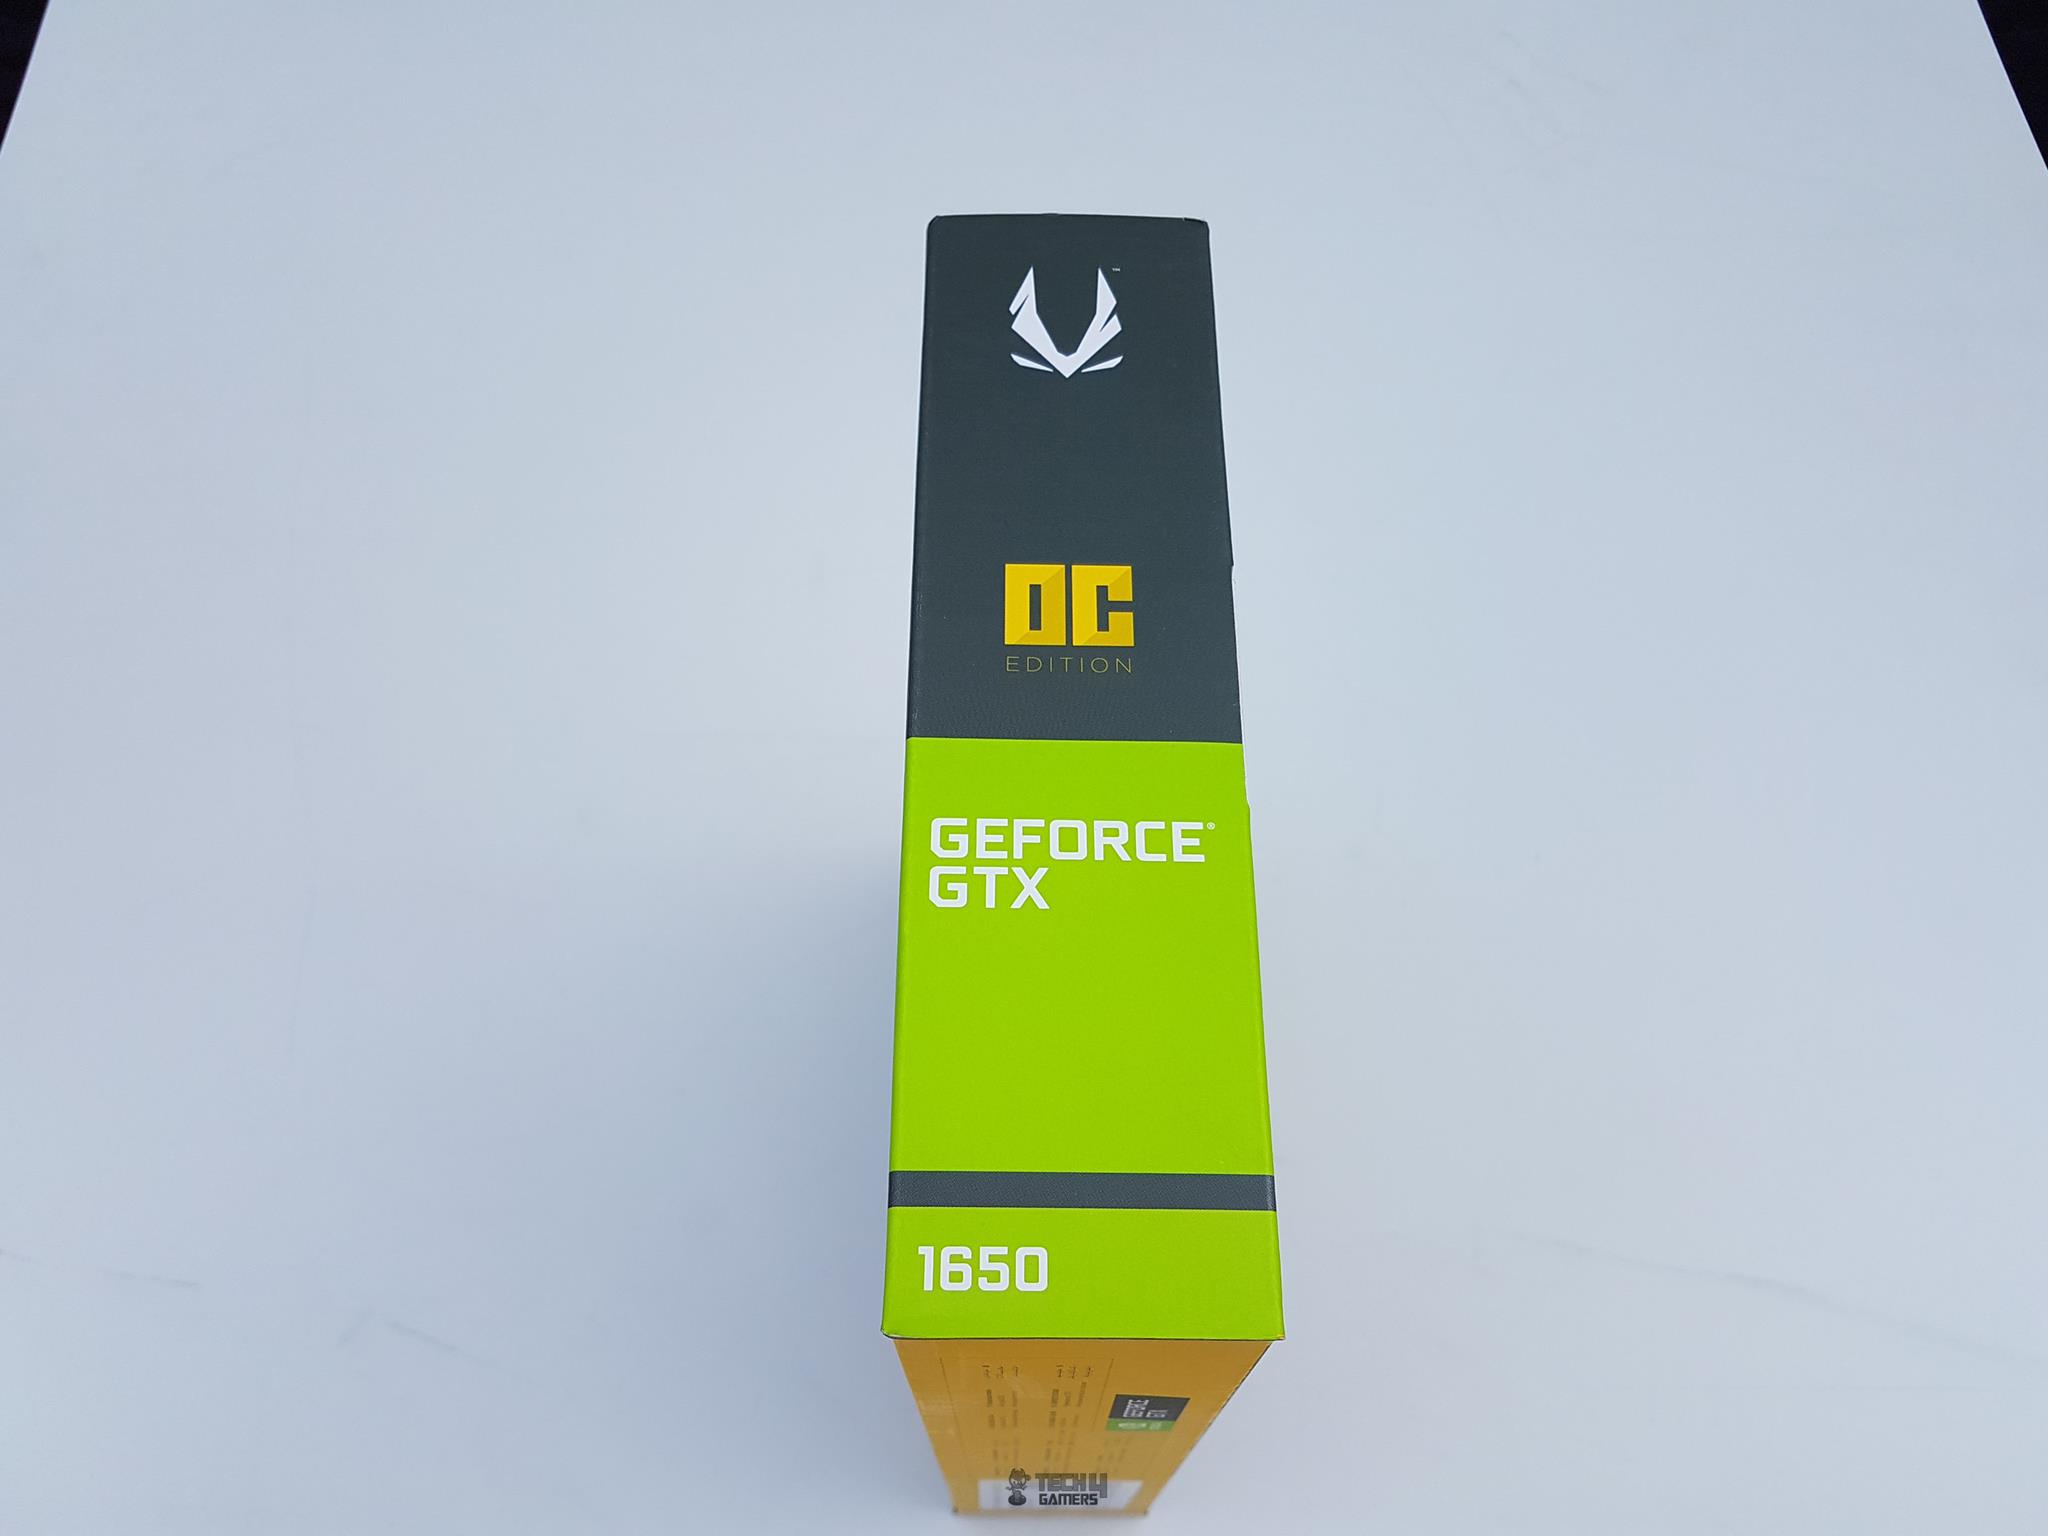 Zotac Gaming Geforce Gtx 1650 Oc left and right Packing 